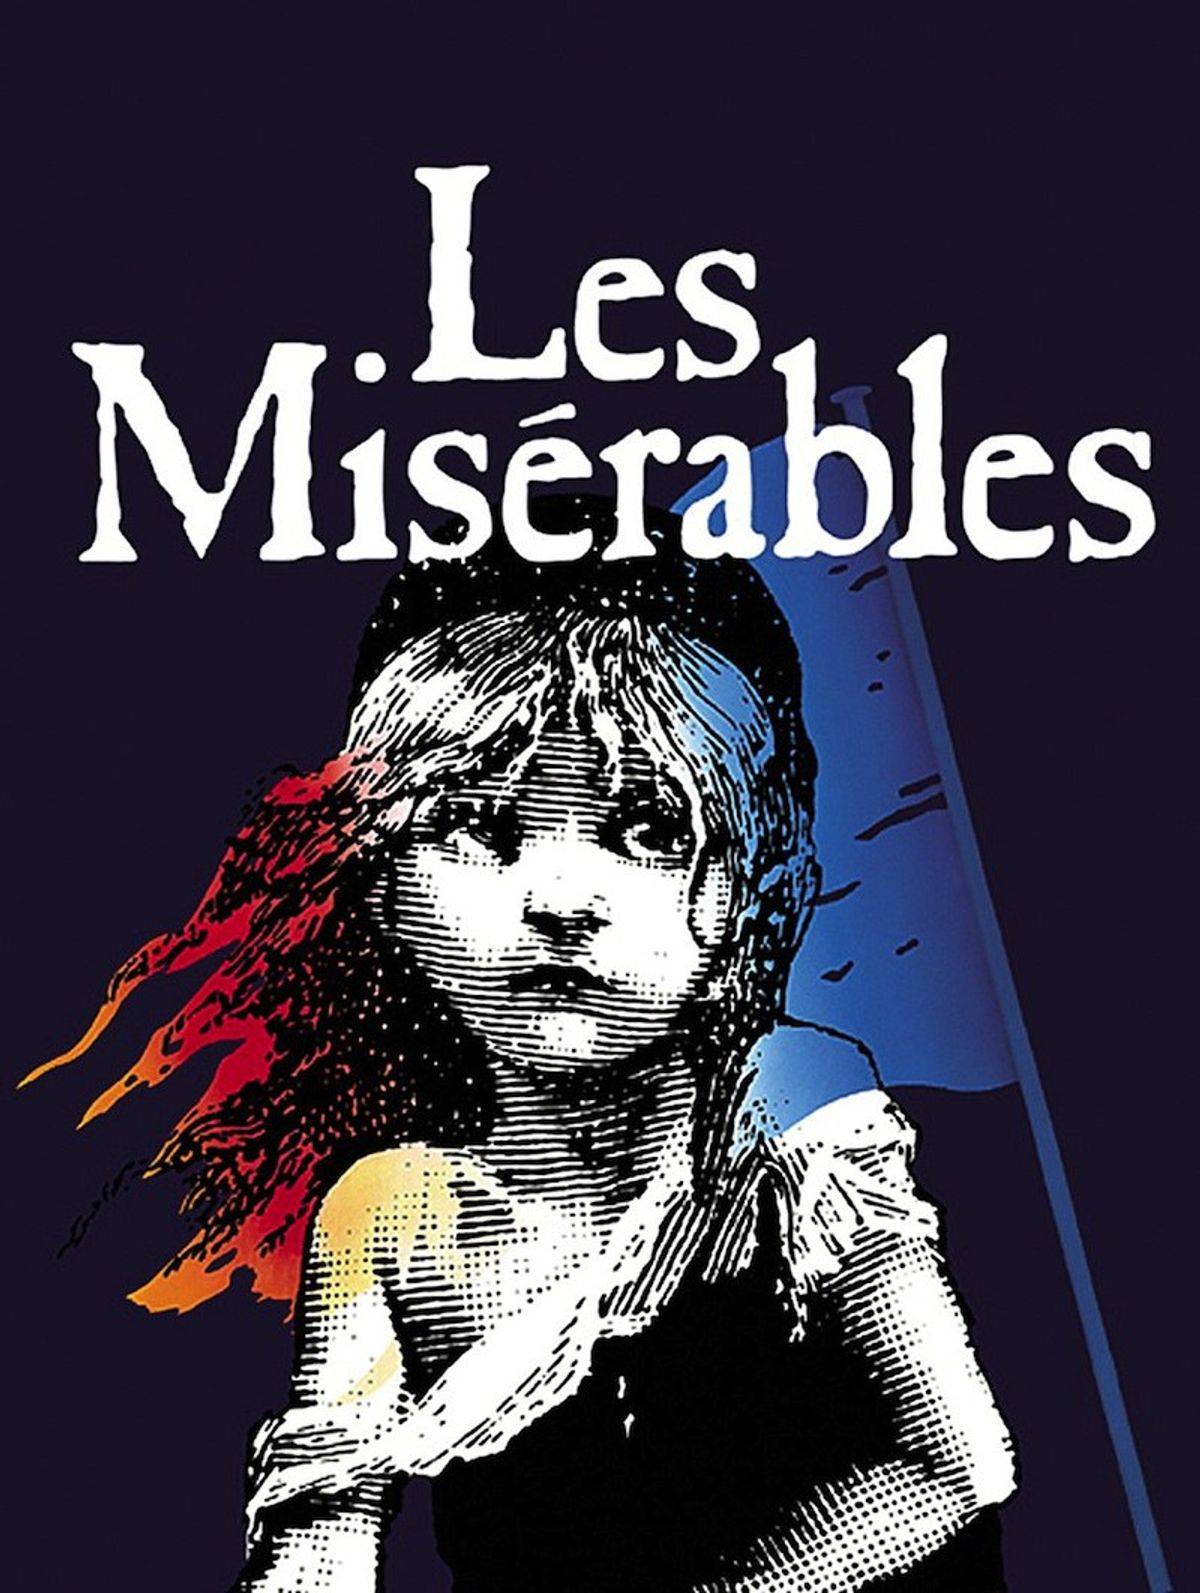 Les Miserables: A Summer Experience In Itself